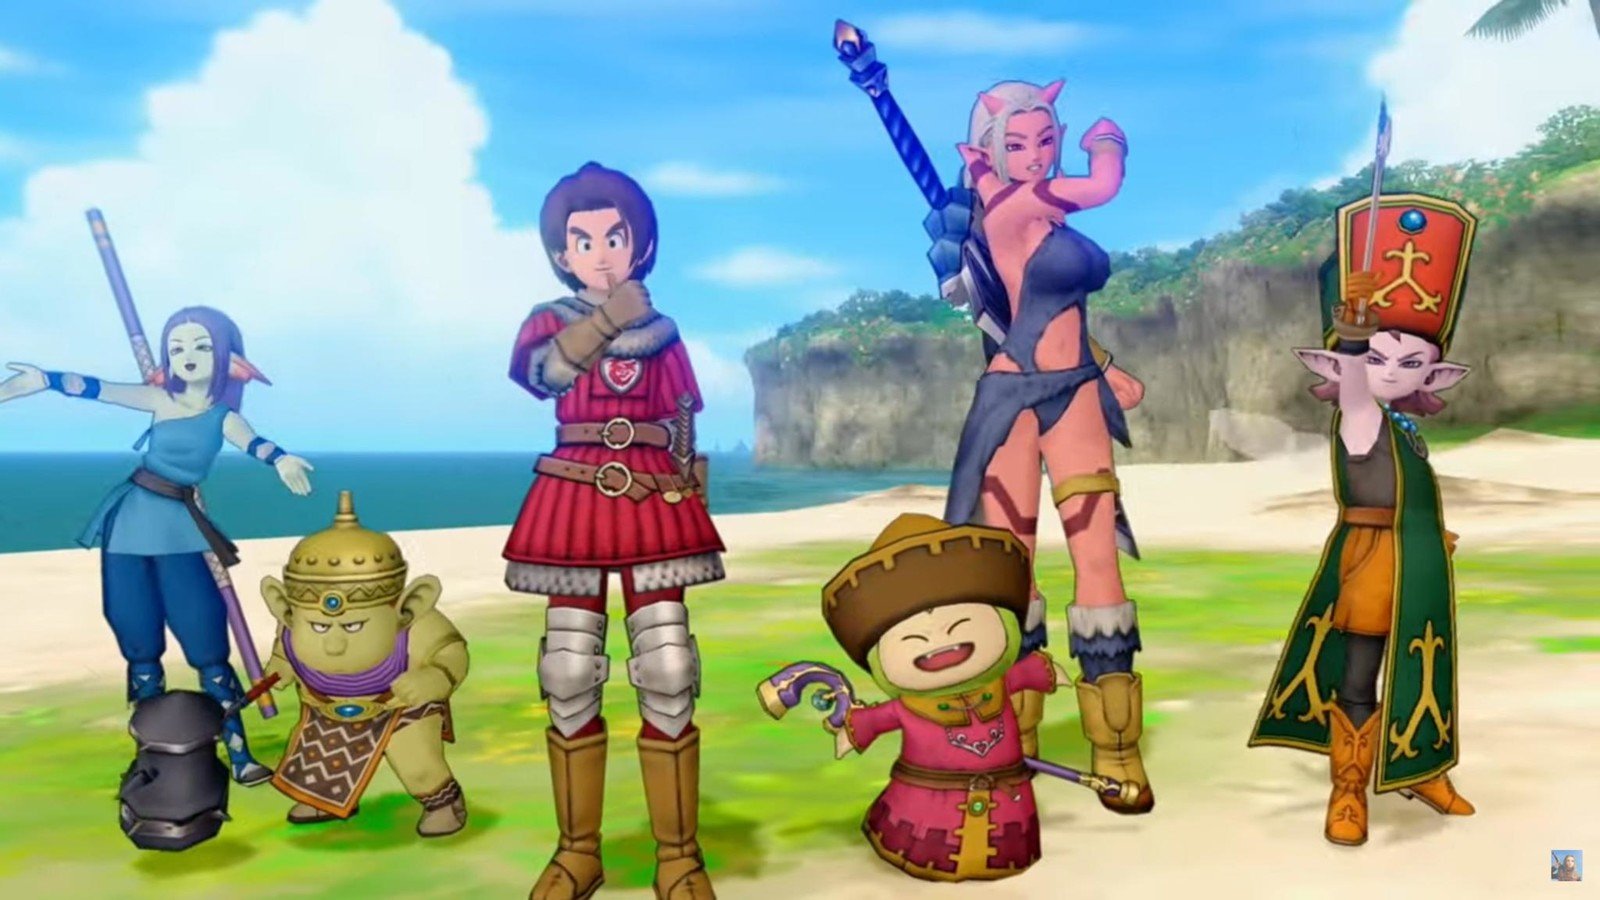 Dragon Quest 12: The Flames of Fate — Everything we know so far